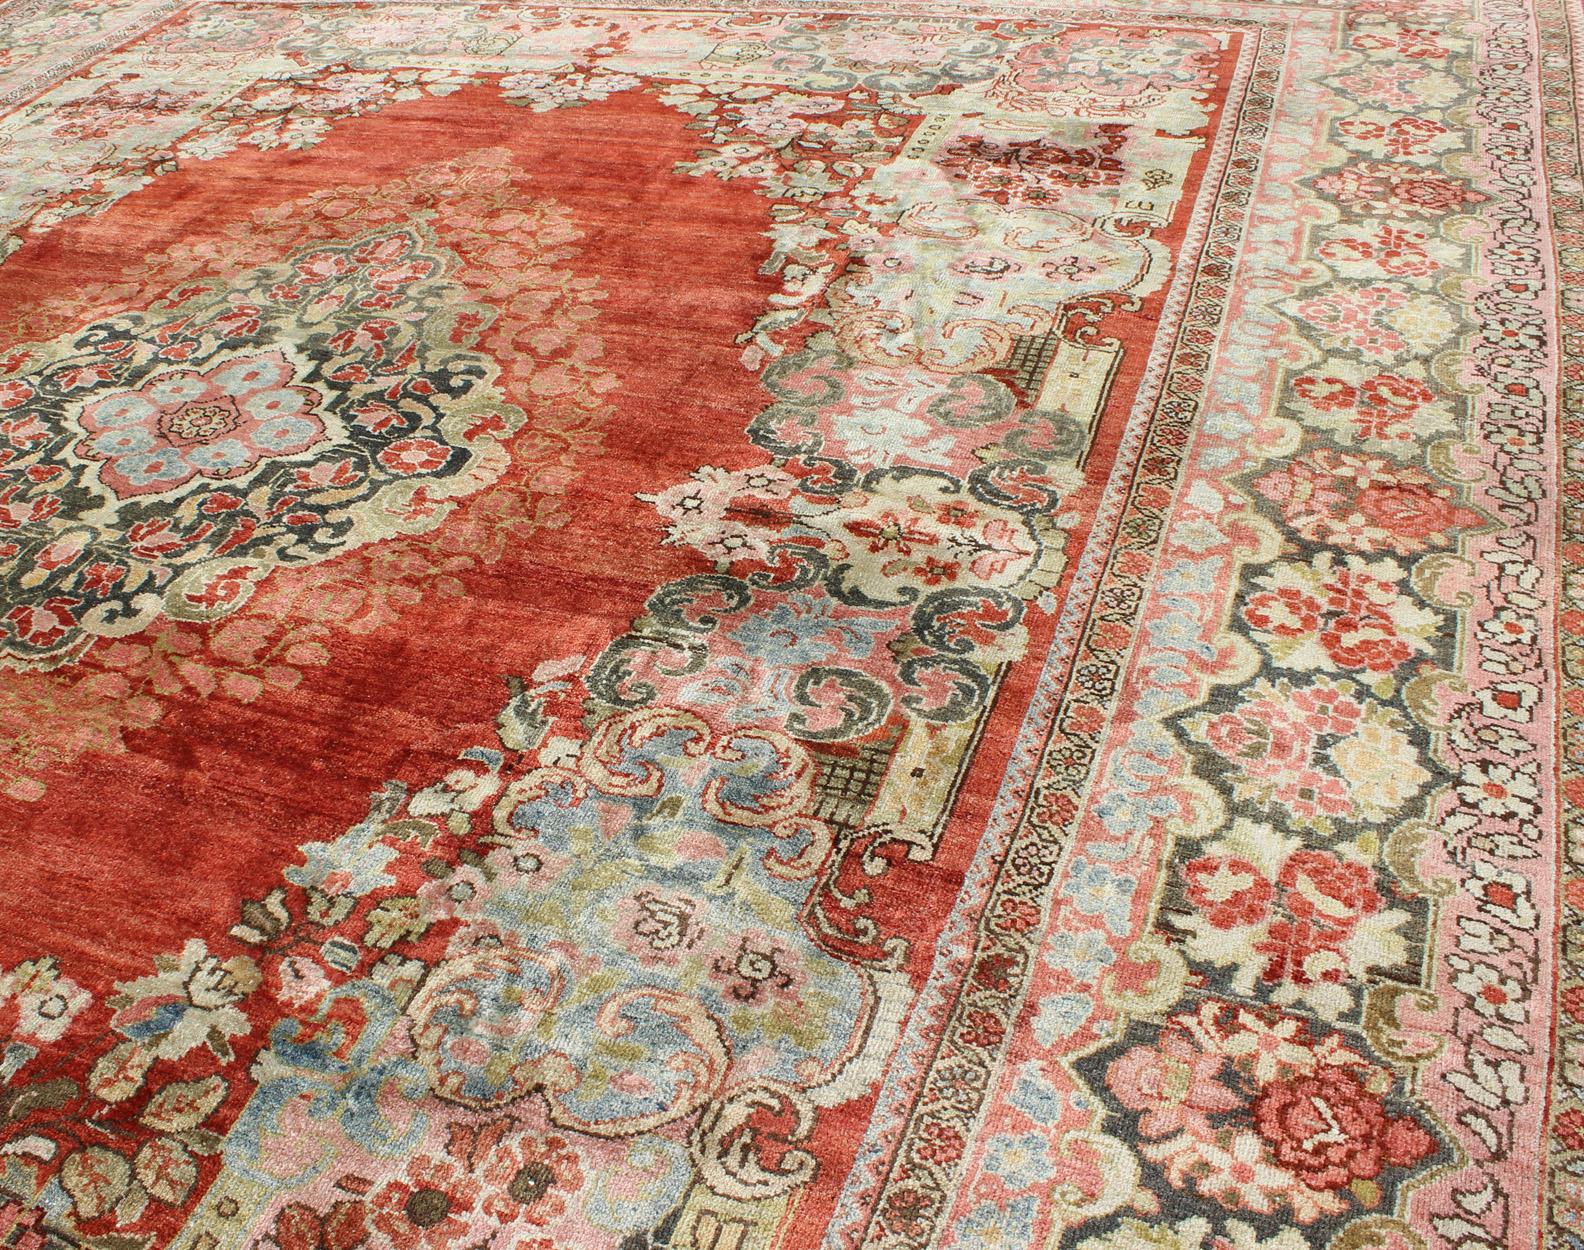  Persian Antique Mahal Rug with Beautiful Floral Design in Red, Pink, and Green  For Sale 2